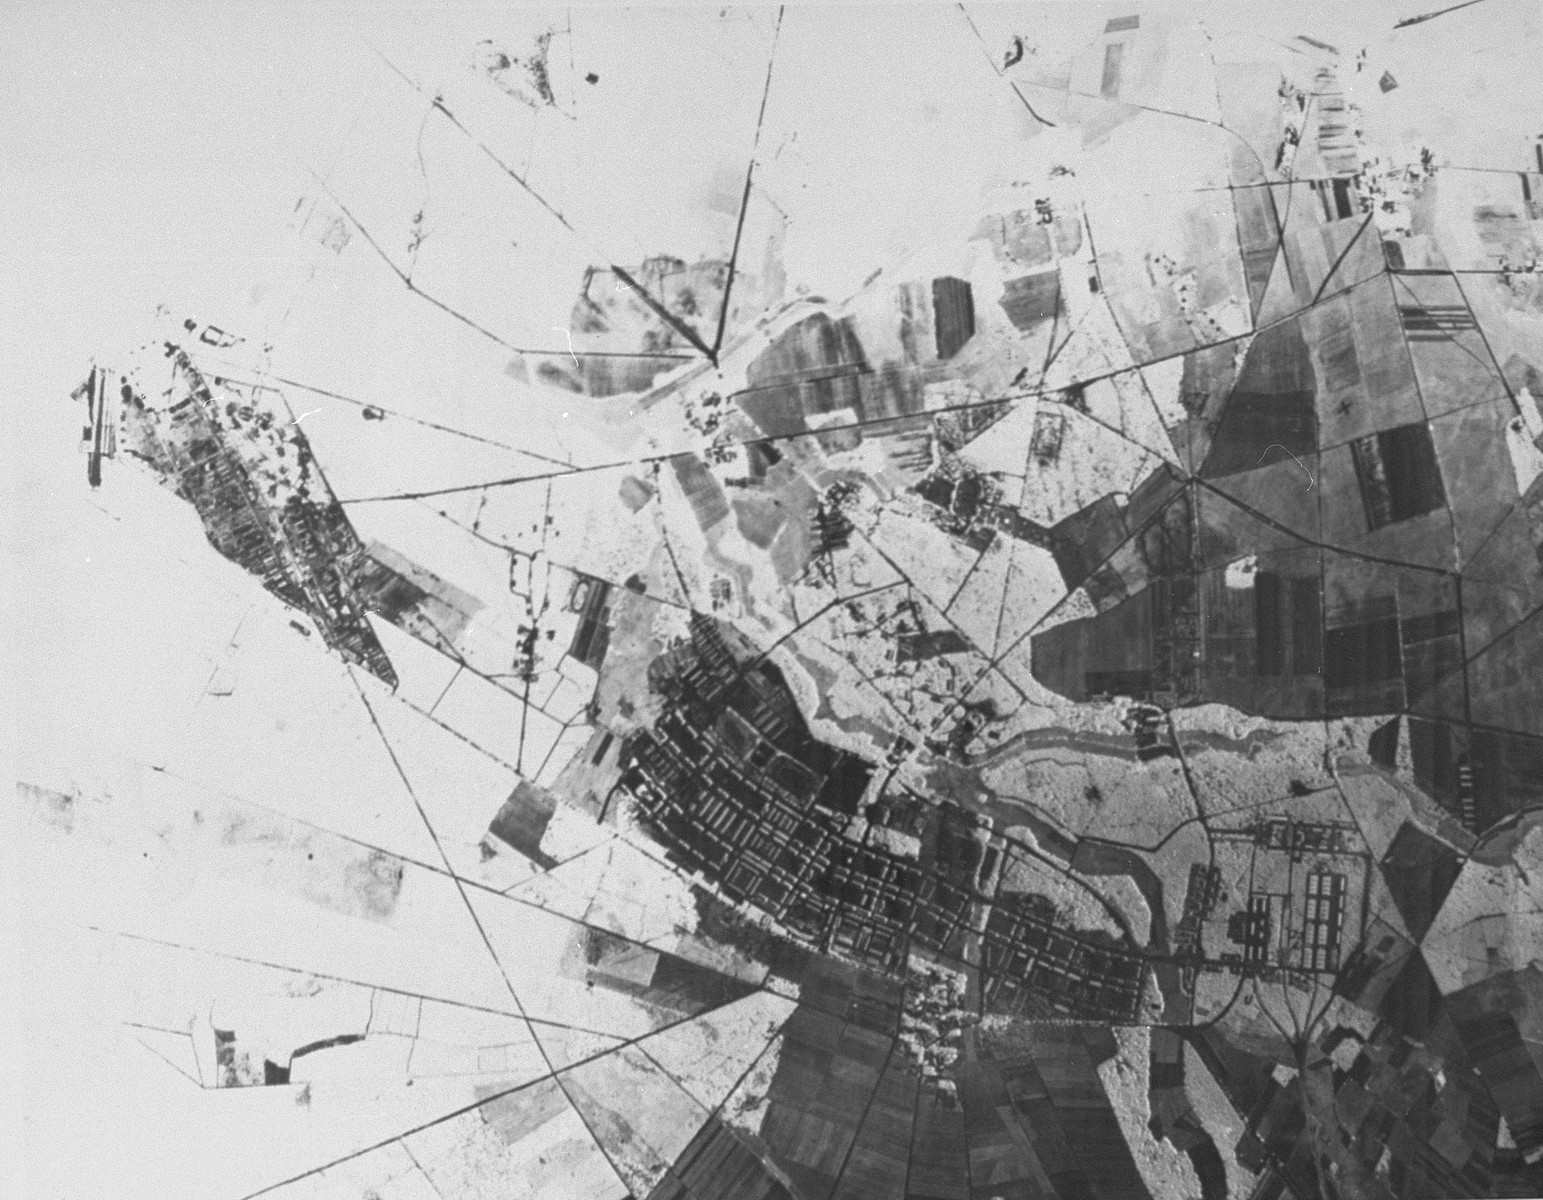 Aerial reconnaissance photograph of the Bergen-Belsen concentration camp area showing the village of Bergen.